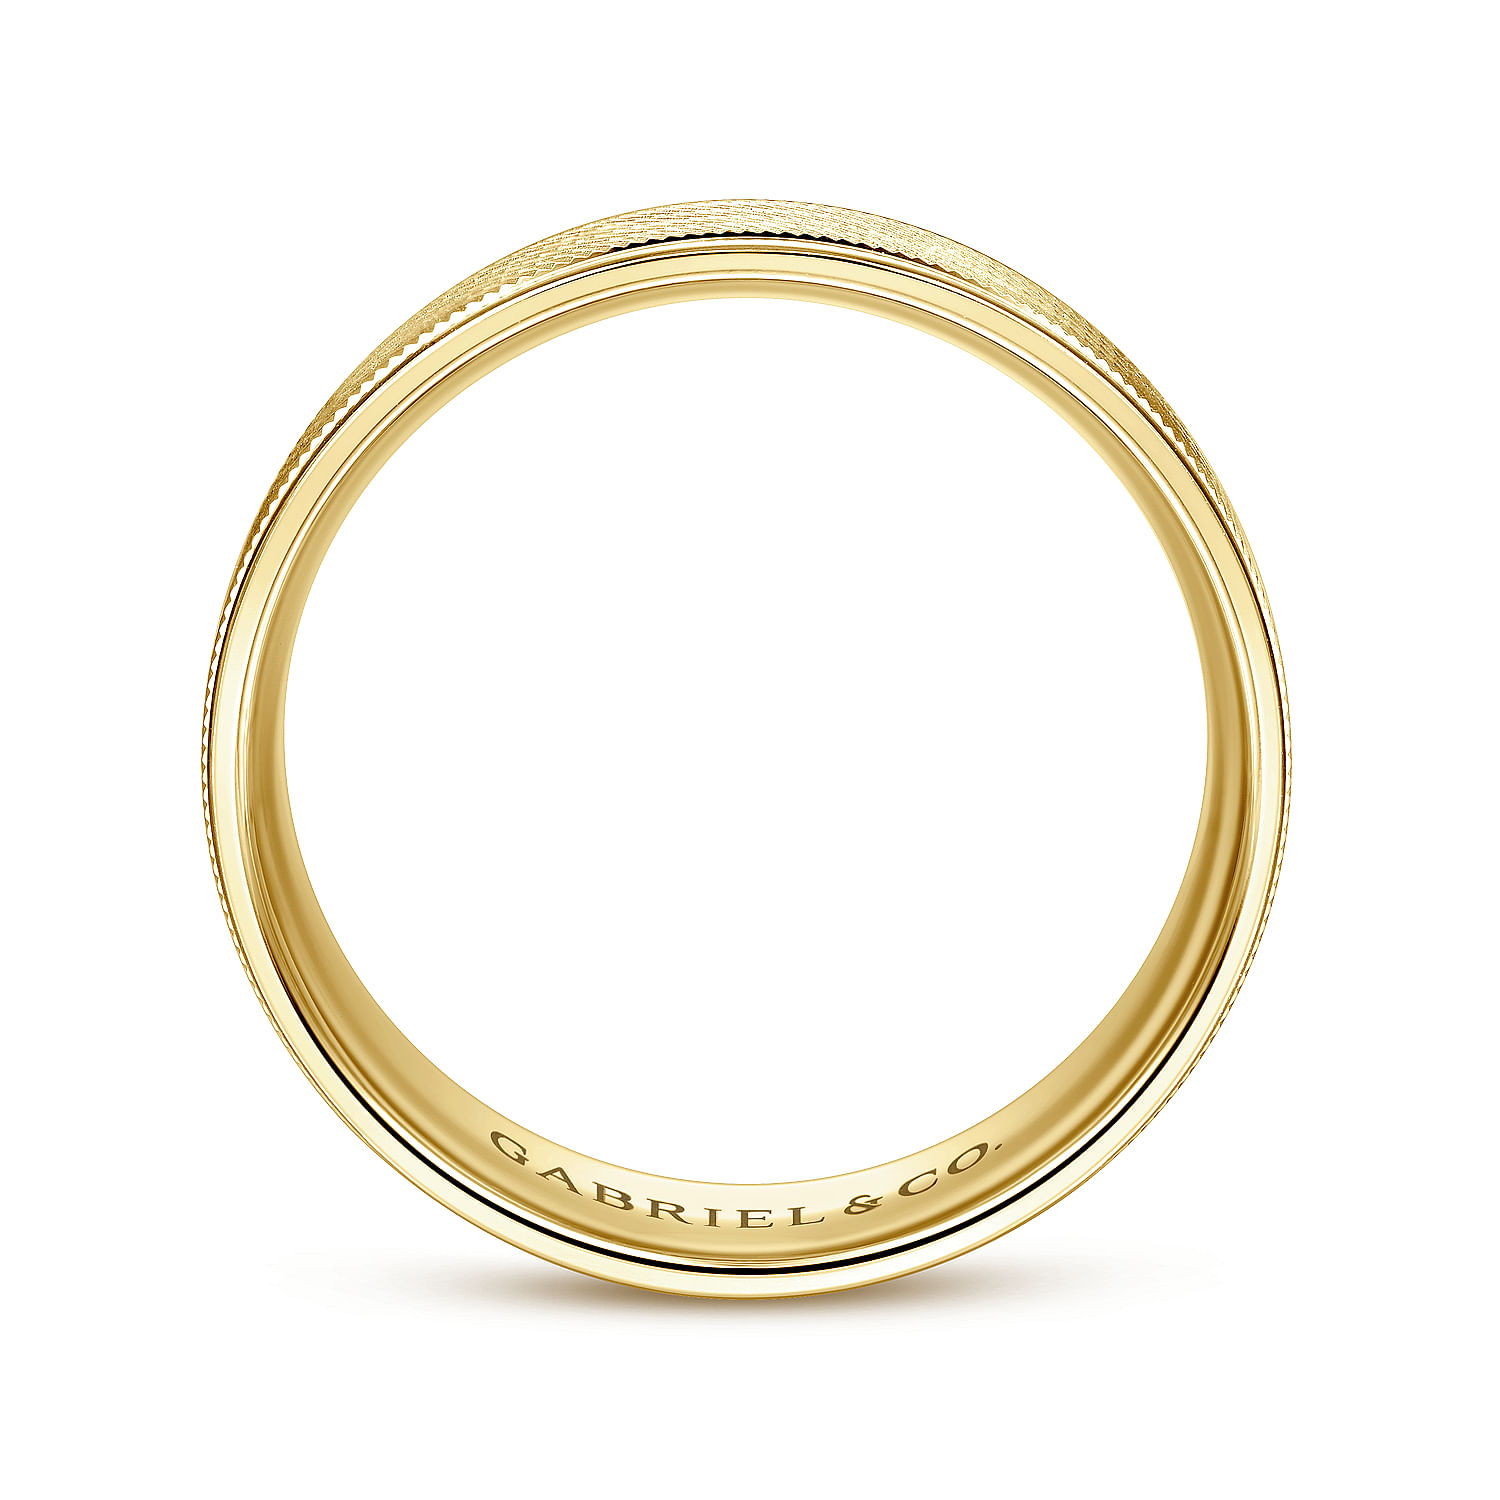 14K Yellow Gold 6mm - Men's Wedding Band in Brushed Finish